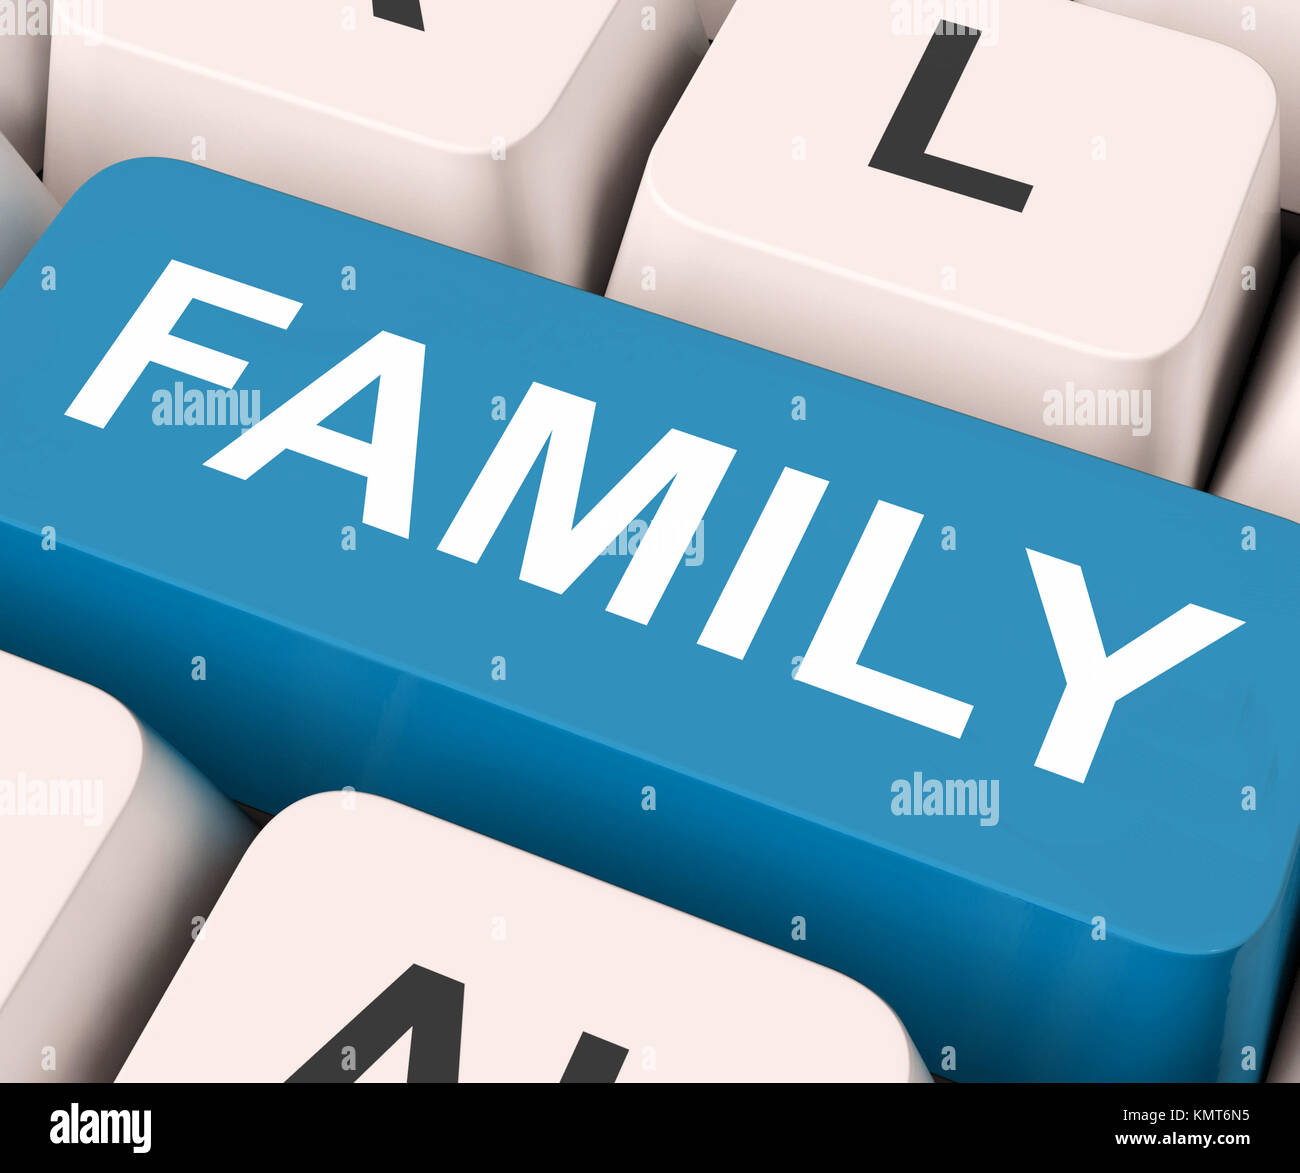 Family Key On Keyboard Meaning Relatives Relations Or Blood Relation Stock Photo